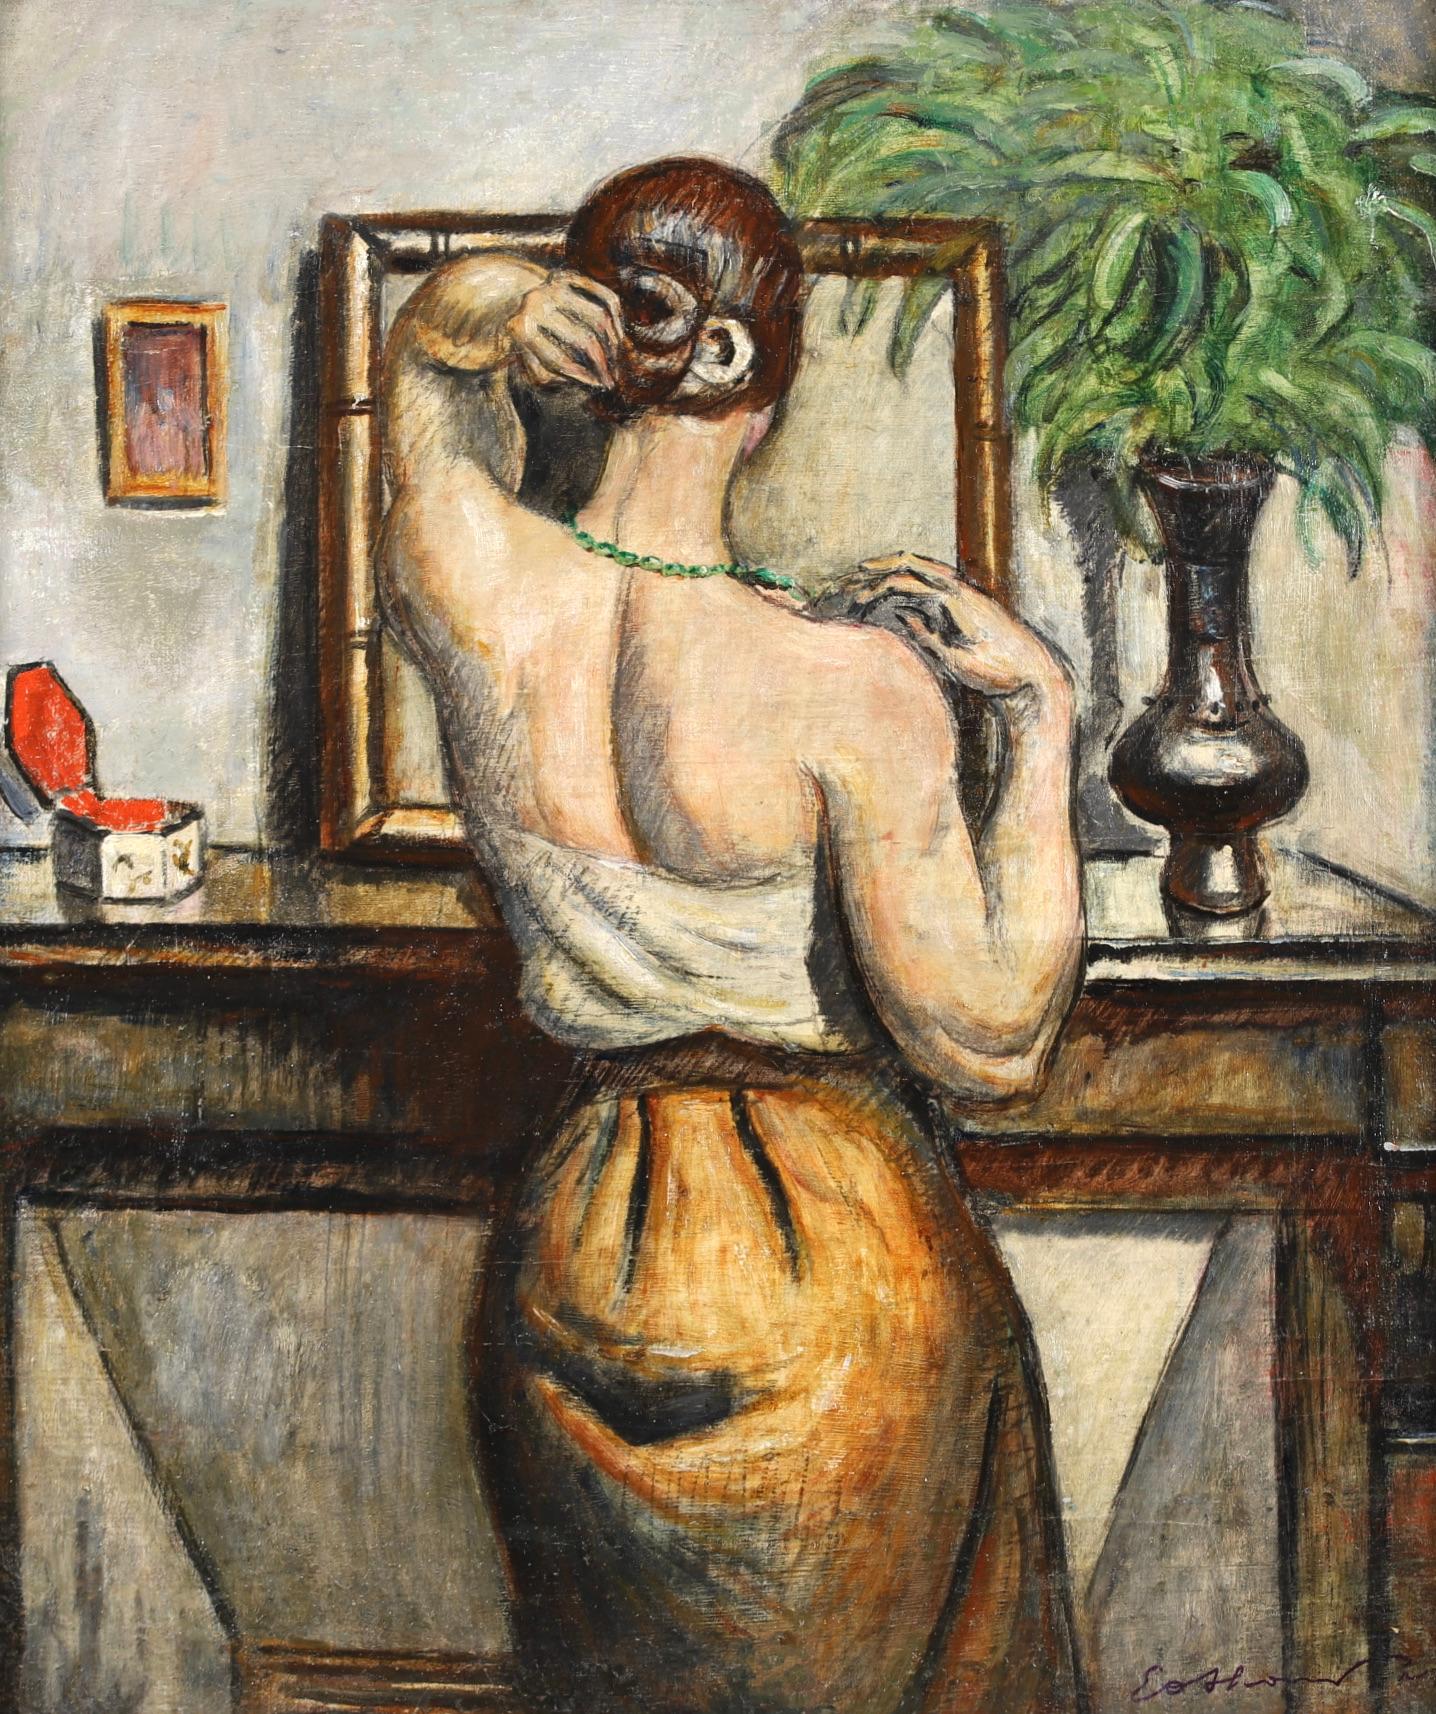 Signed figure in interior oil on canvas circa 1920 by French post impressionist painter Achille-Emile Othon Friesz. The piece depicts a woman standing at a dressing table doing her hair as she looks in the mirror. There's an open trinket box to her